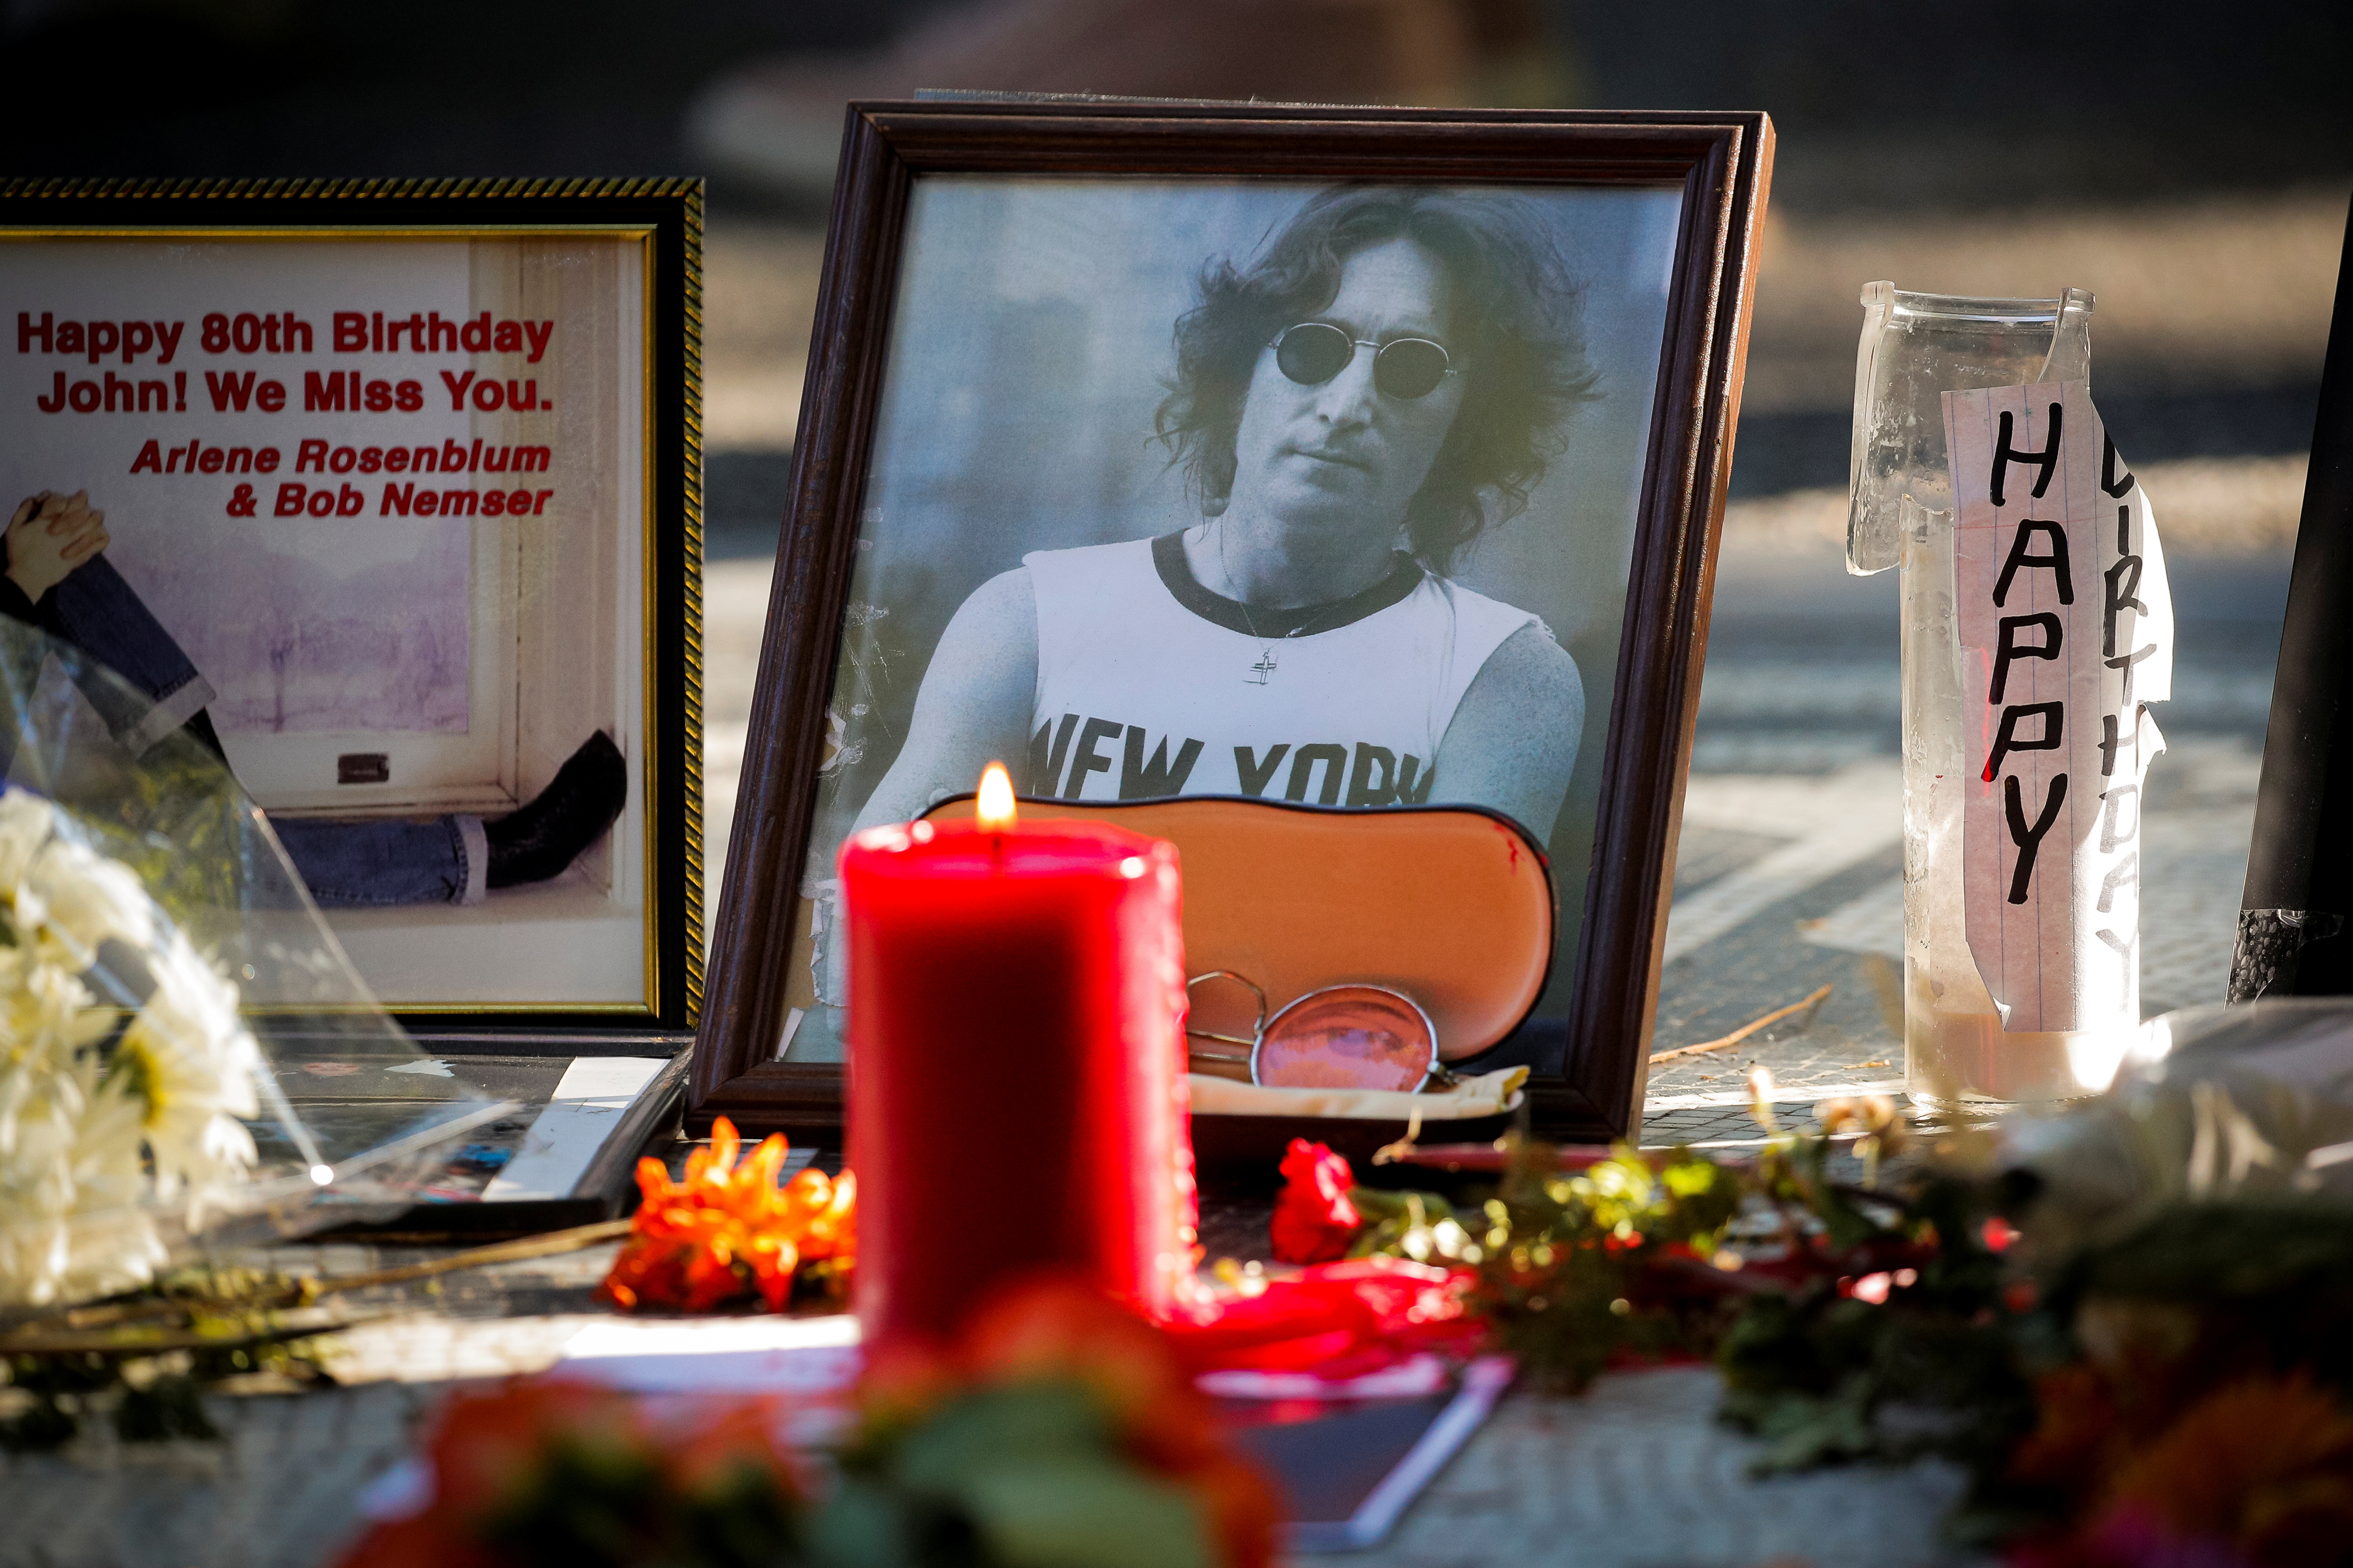 A memorial for late former Beatle John Lennon is seen at the 